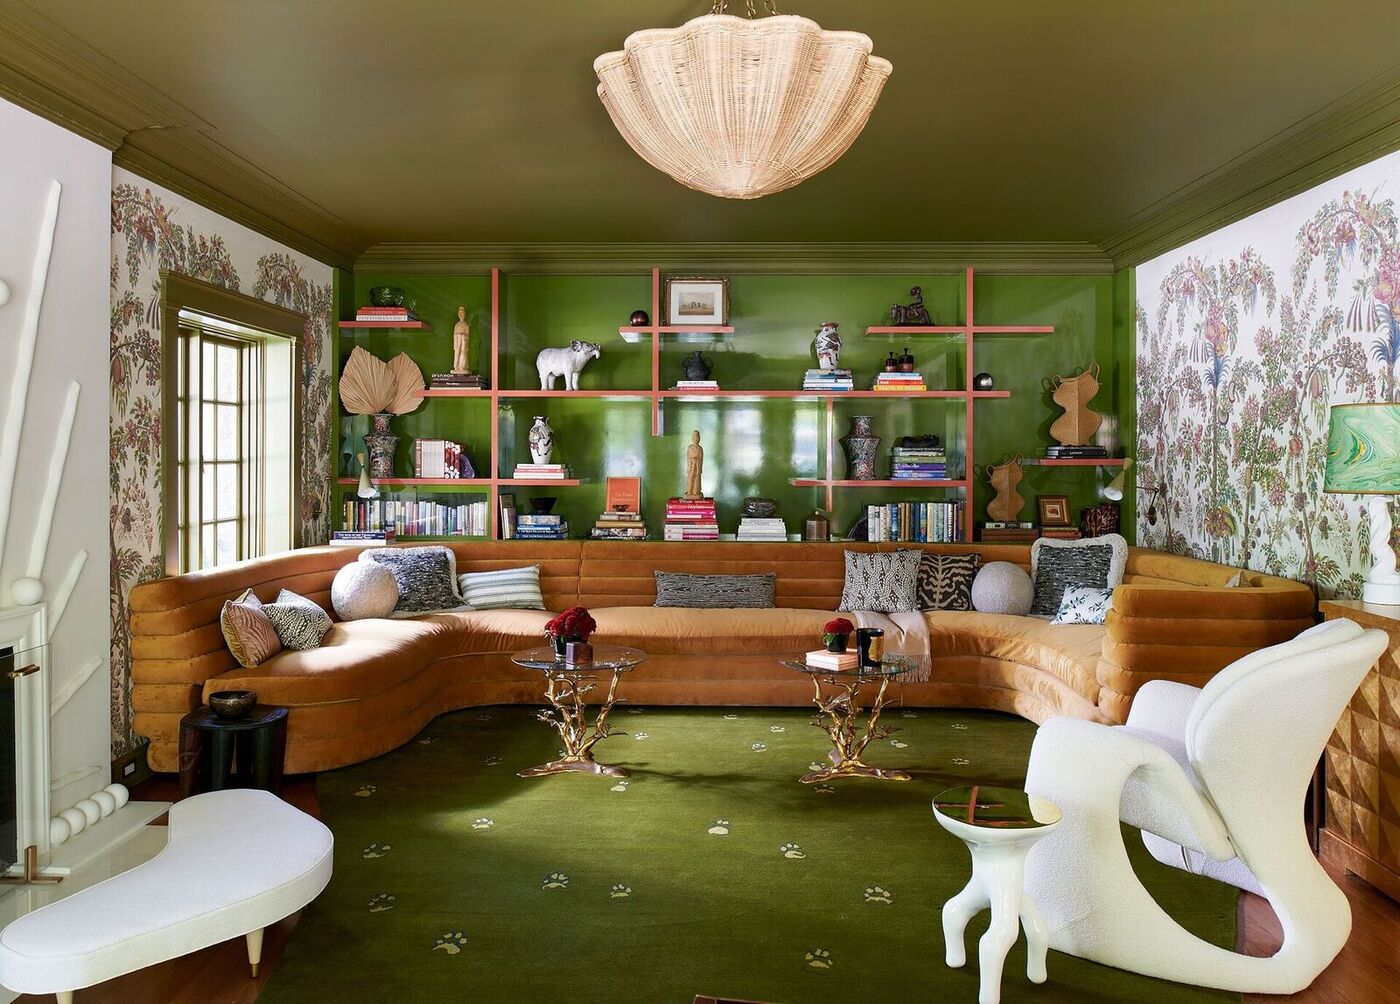 Green Is The Color Of 2023: Designers Show Bold Ways To Use It